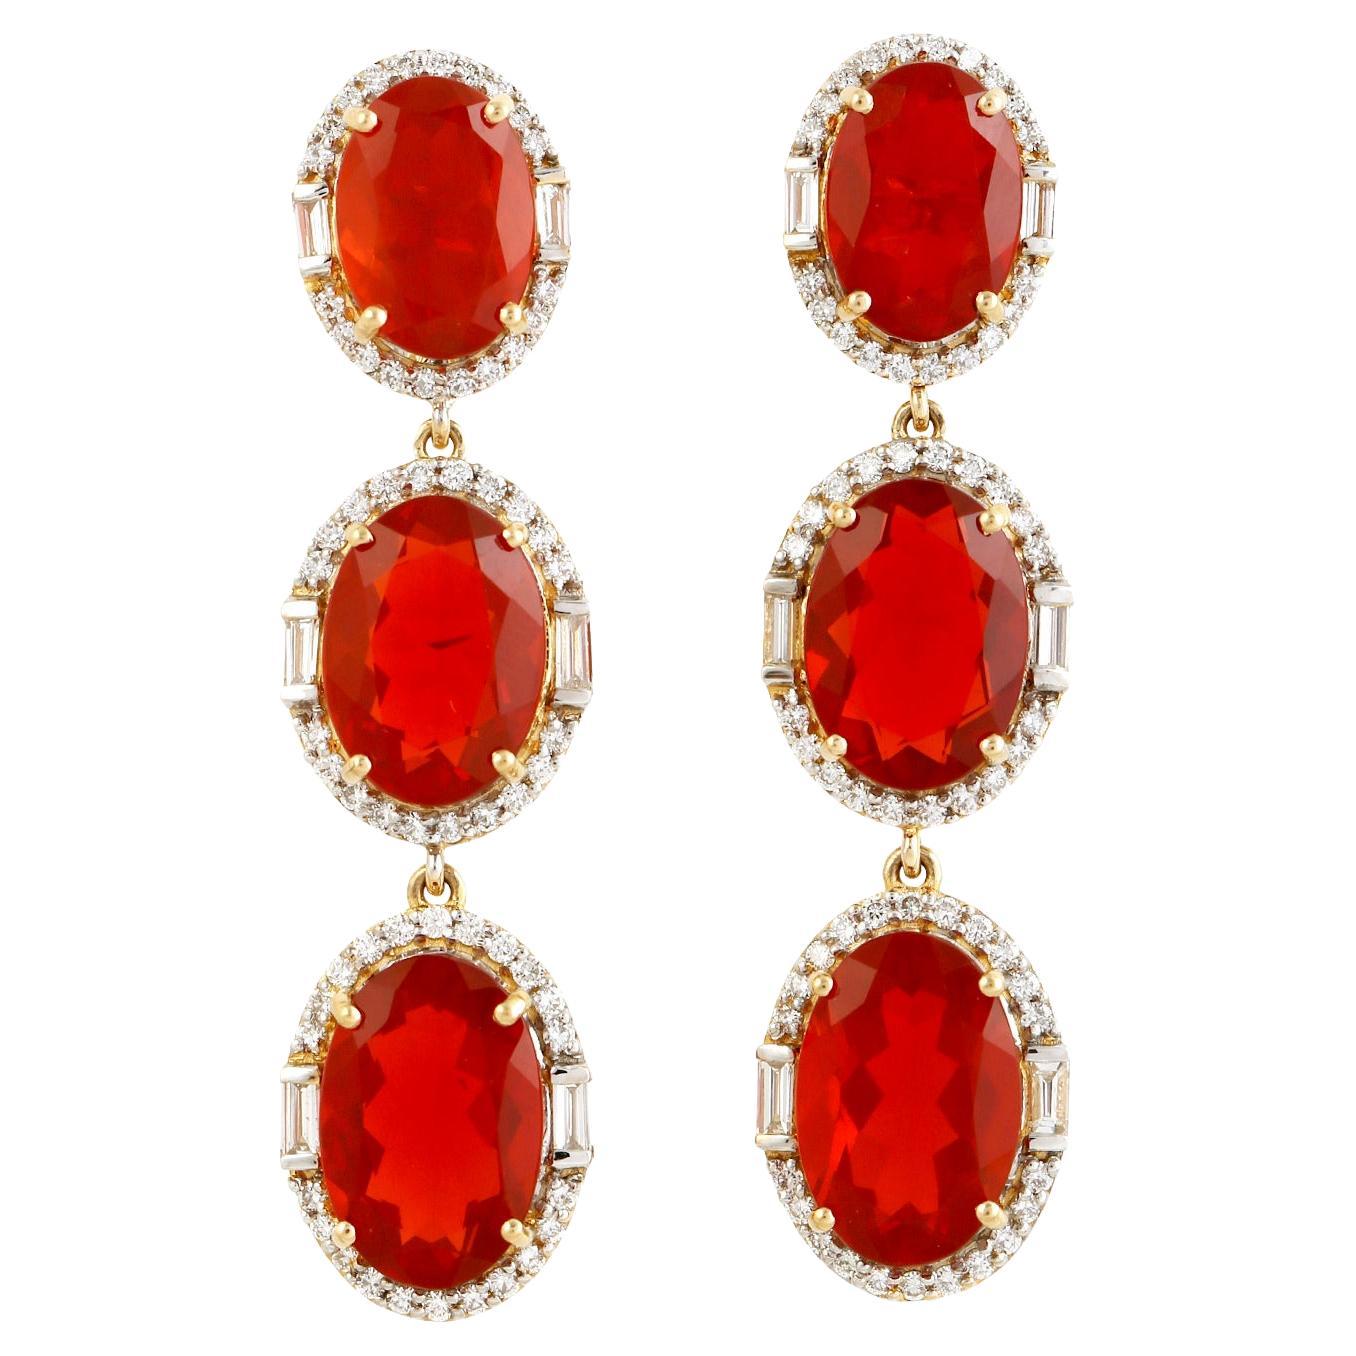 Important Natural Fire Opal Dangle Earrings Diamond Halo 18K Gold For Sale